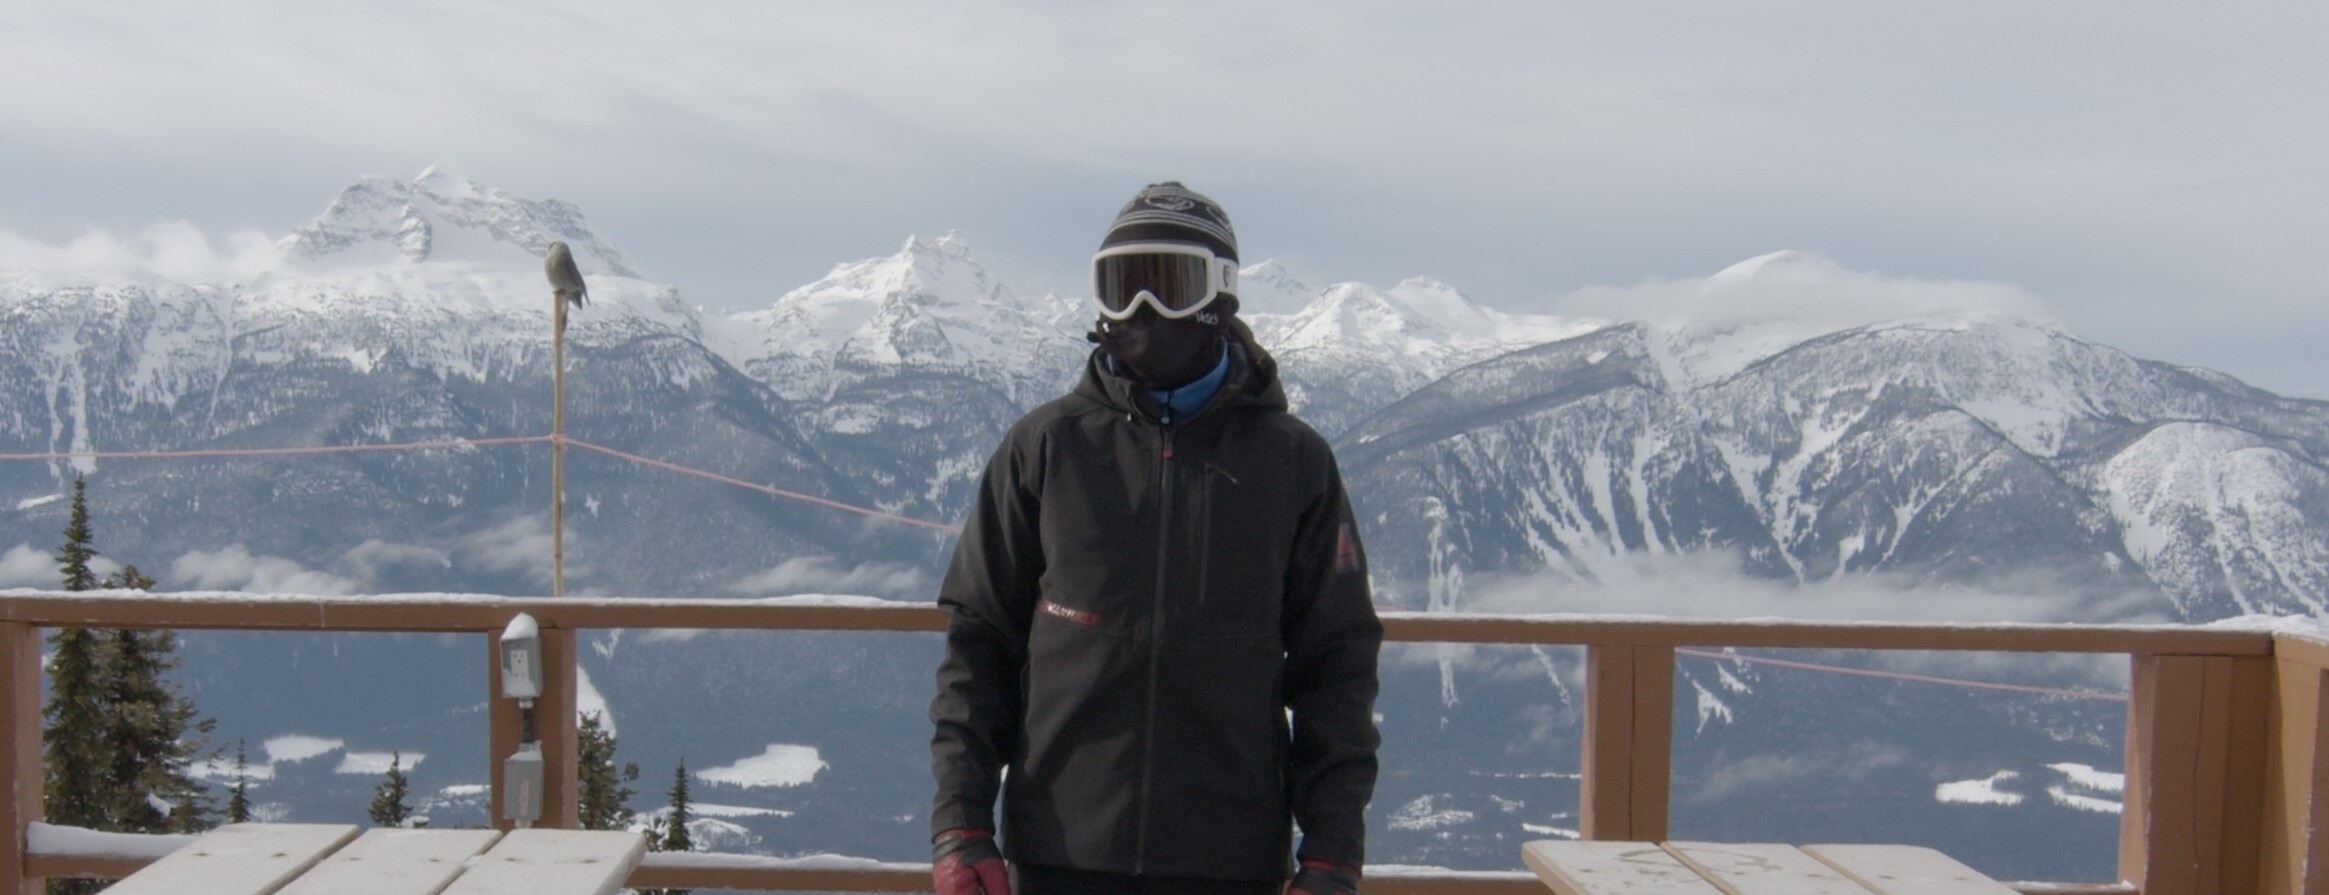 man with snow gear on looking into distance with snowy mountains behind him